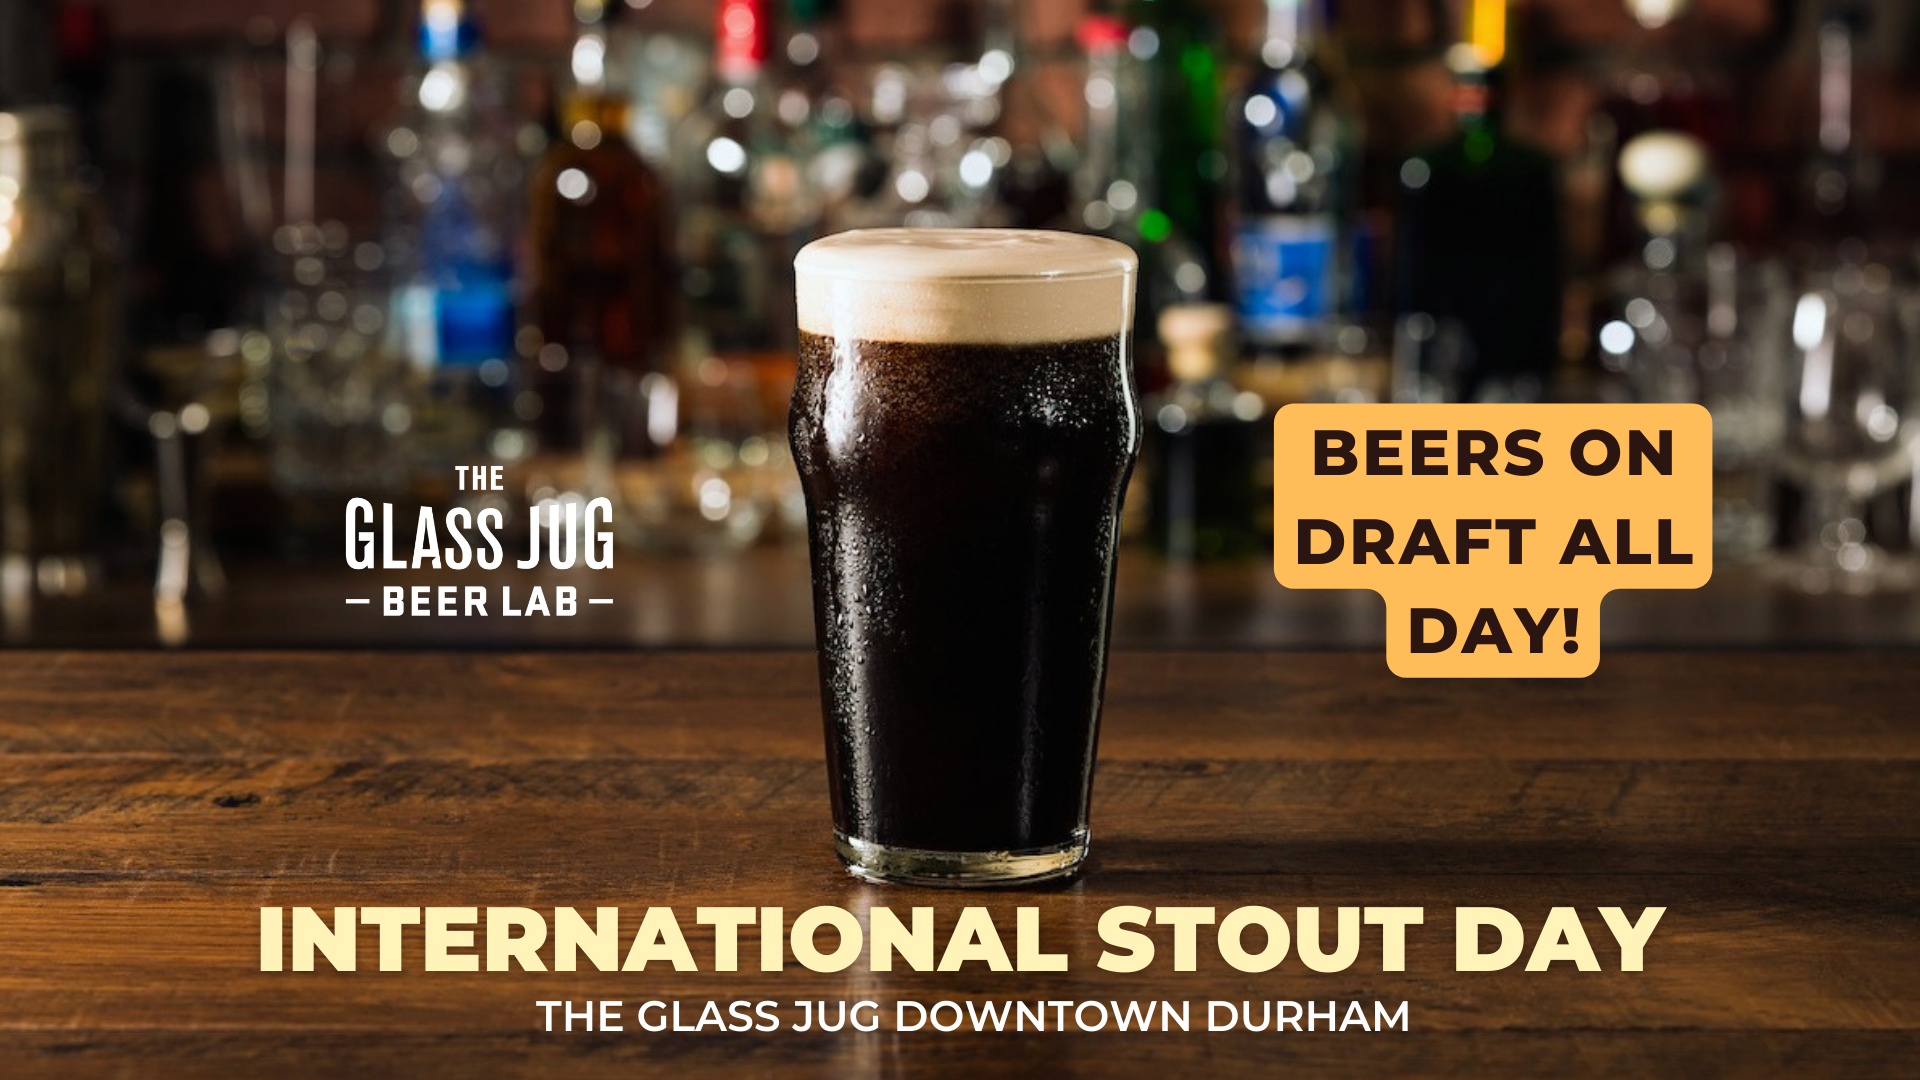 International Stout Day — The Glass Jug Beer Lab